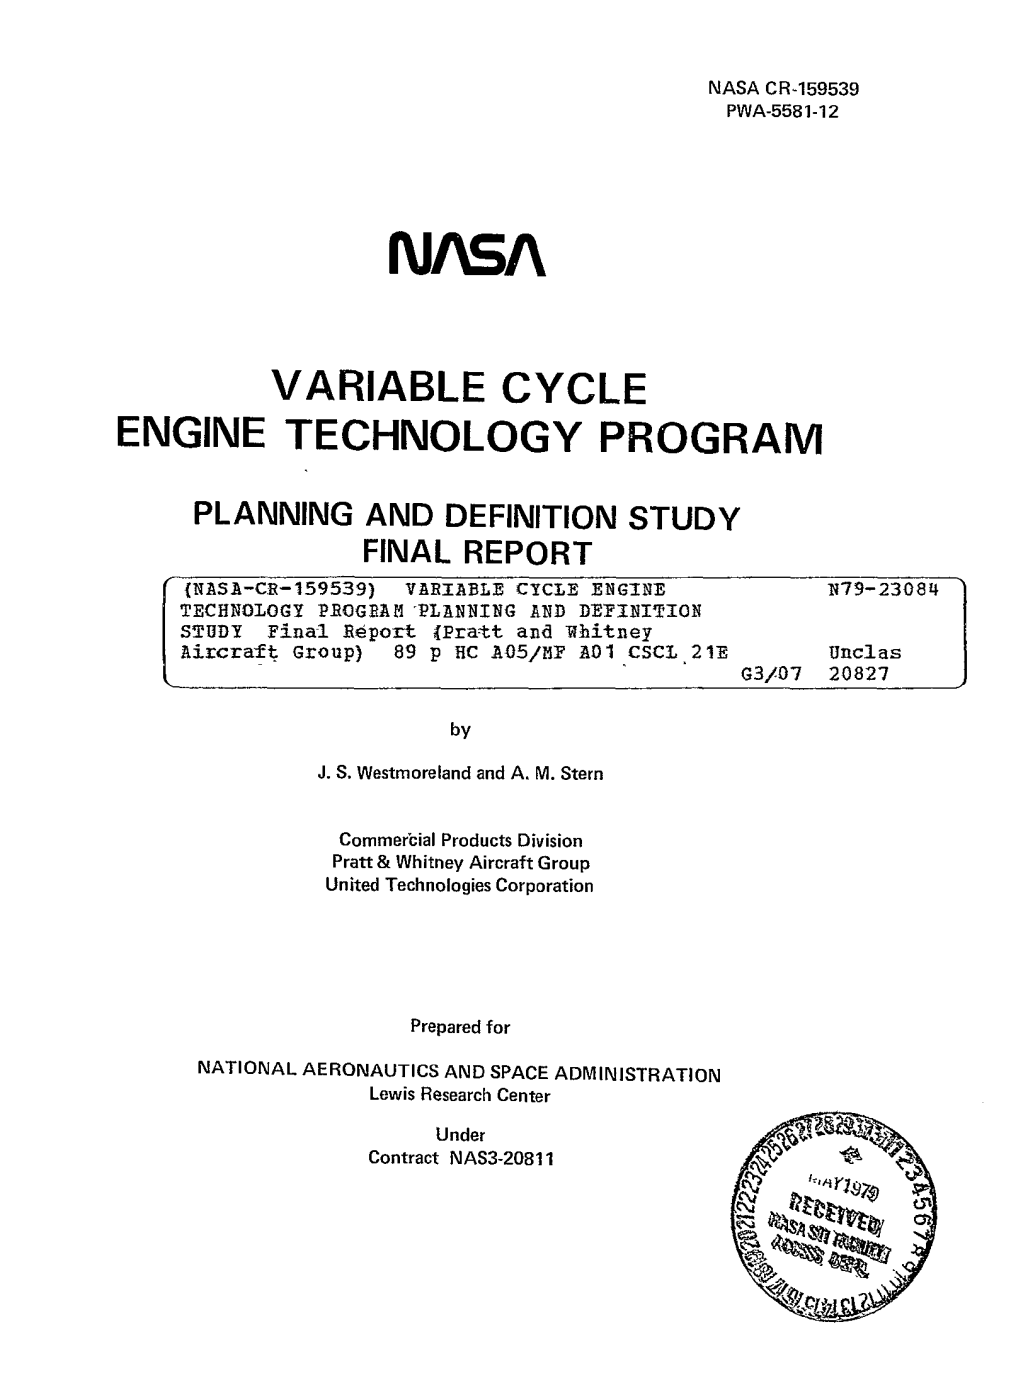 Variable Cycle Engine Technology Program